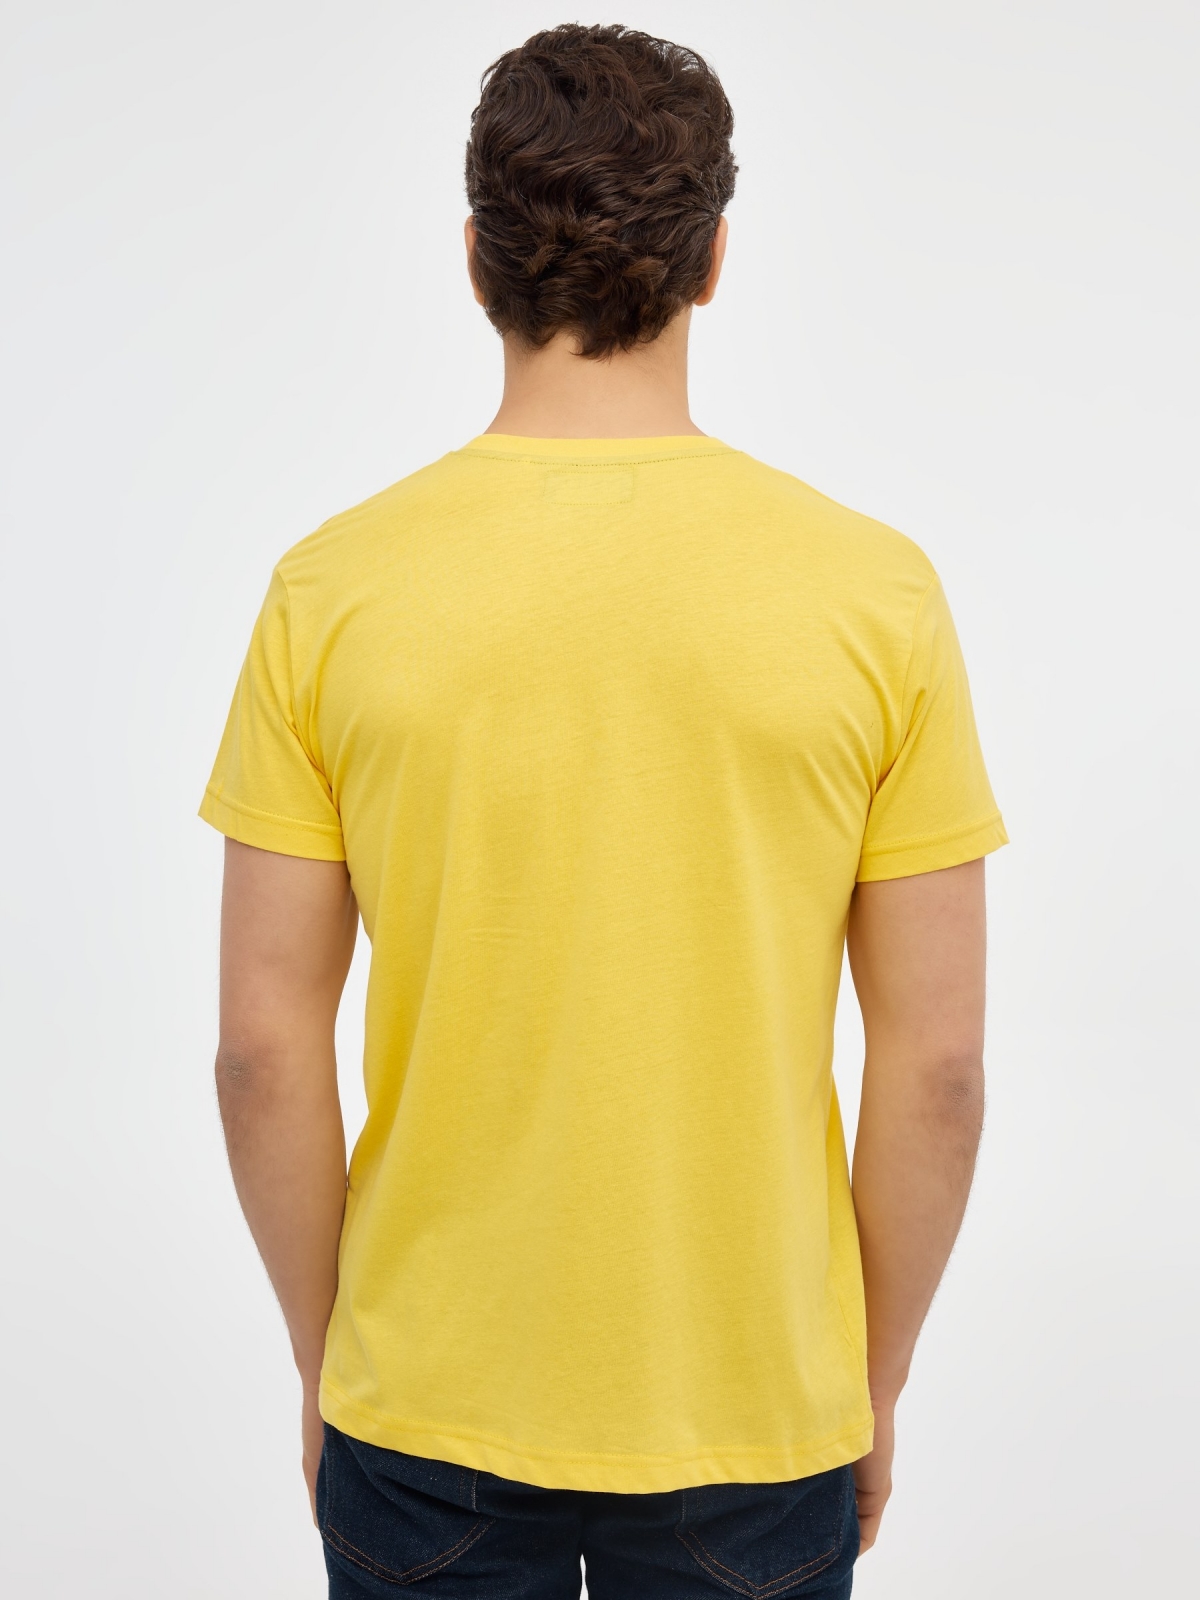 Basic short sleeve t-shirt yellow middle back view